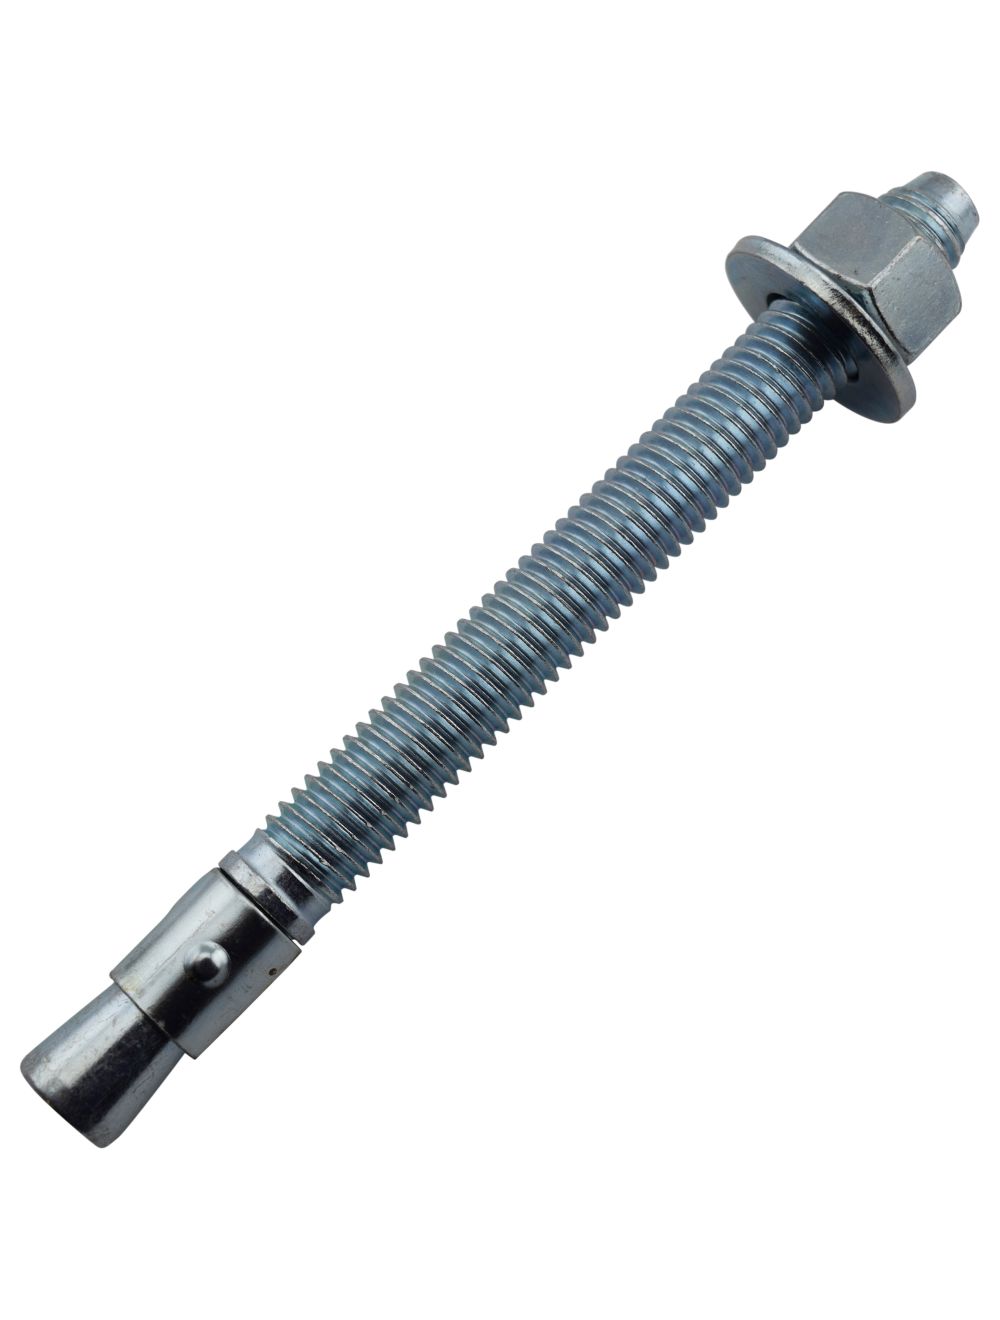 50 Concrete Wedge Anchor Bolts 5/8" x 7" Zinc with Nuts & Washers